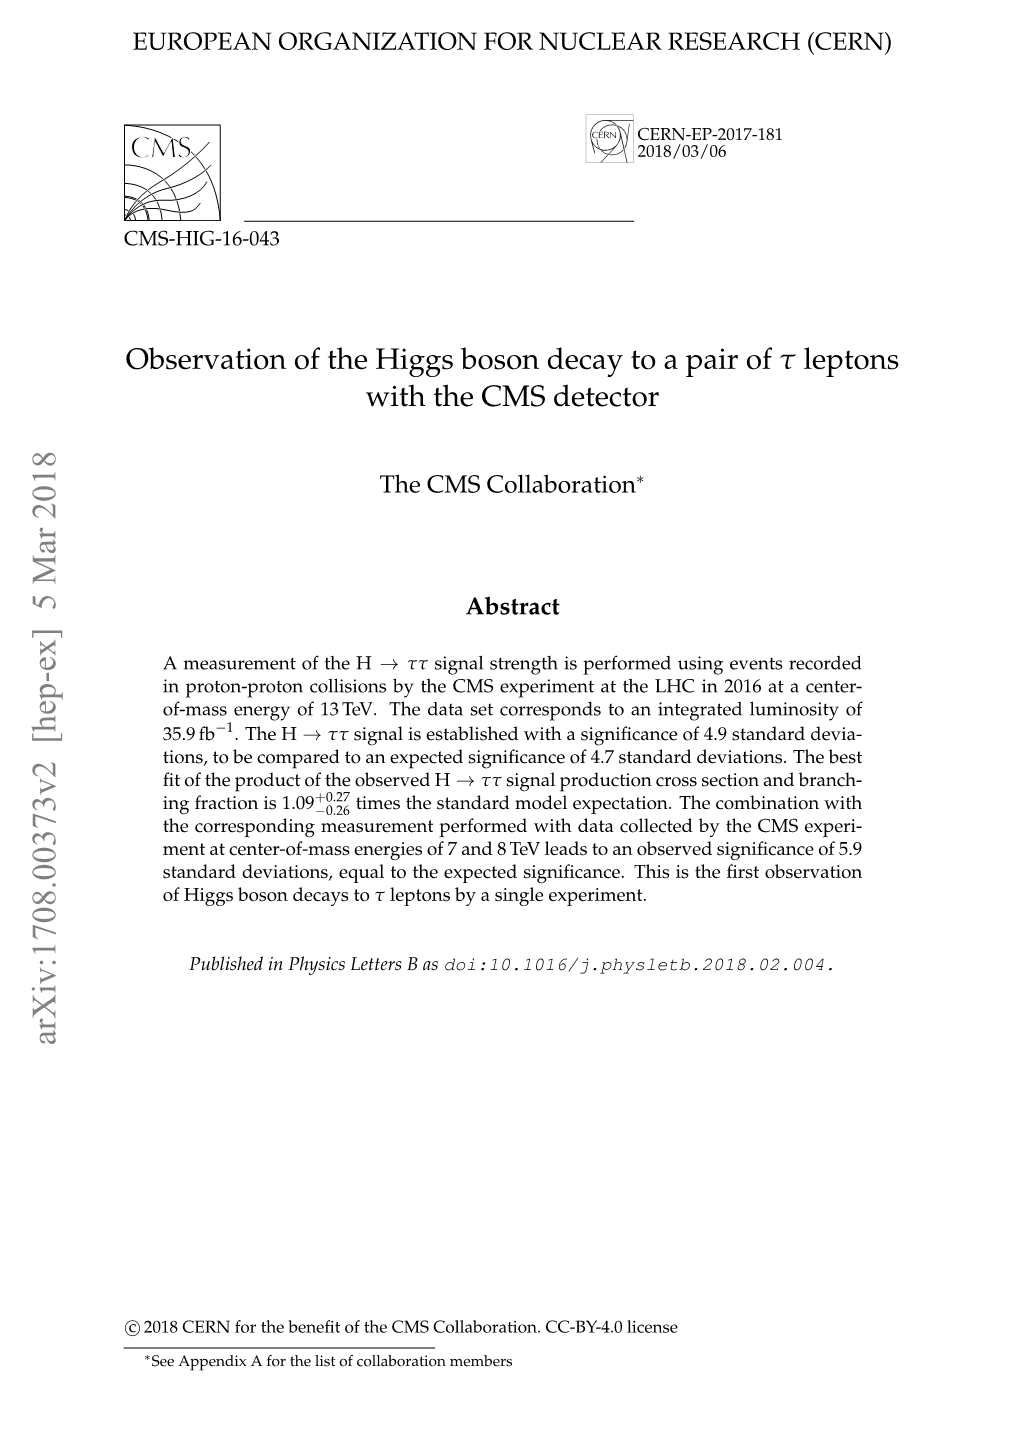 Observation of the Higgs Boson Decay to a Pair of Tau Leptons With